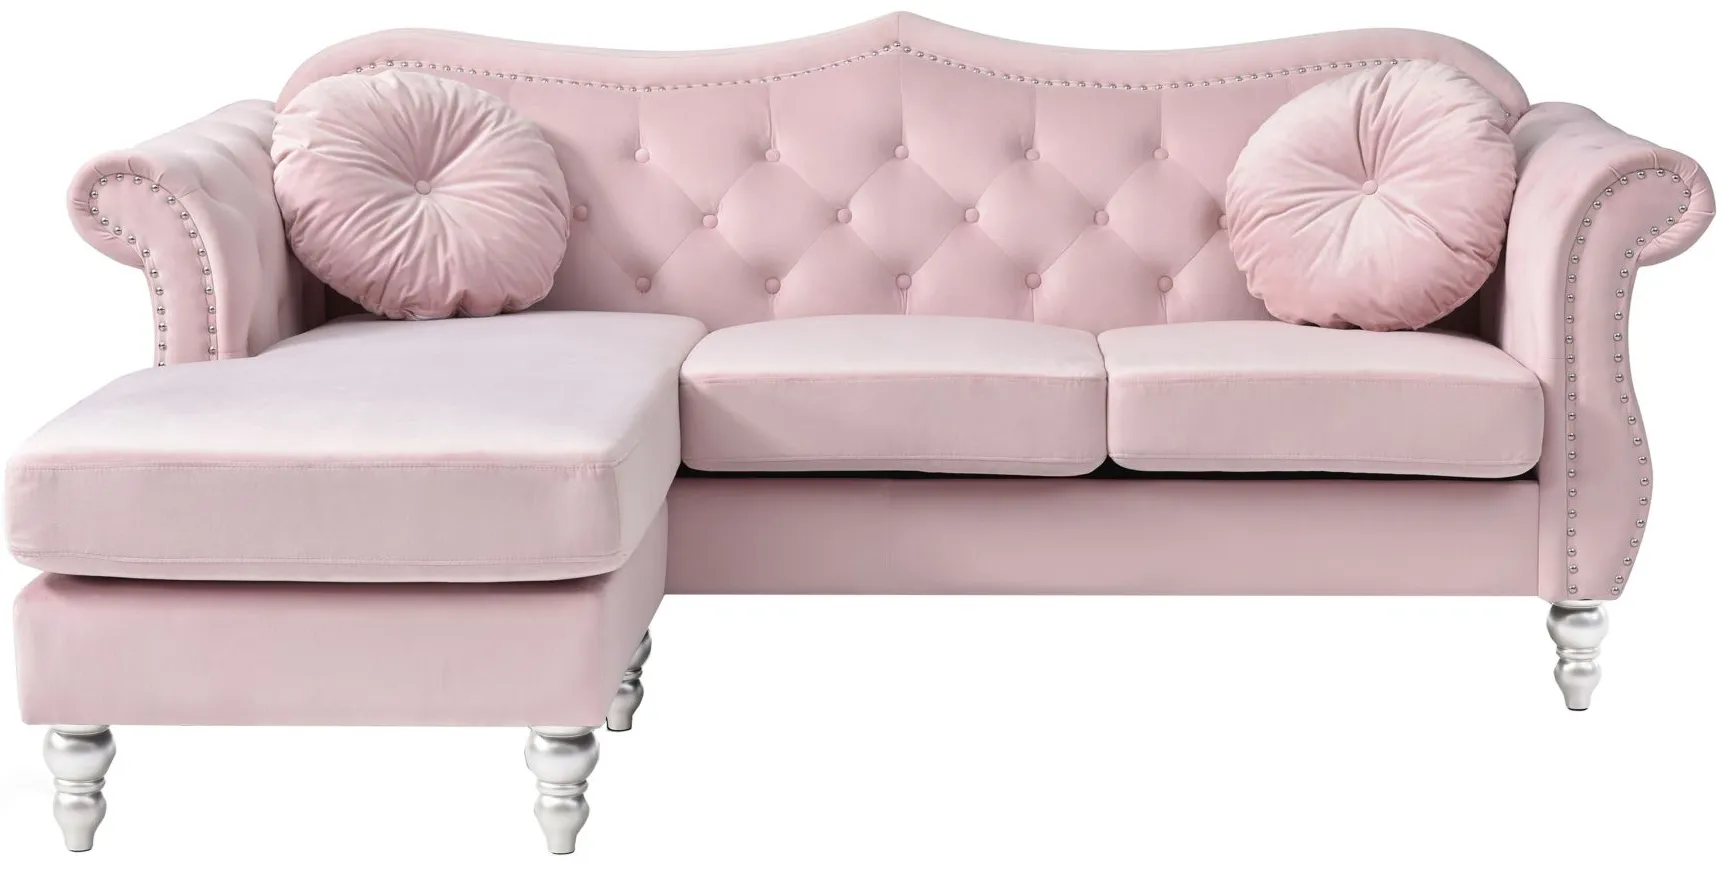 Hollywood Sectional Sofa in Pink by Glory Furniture